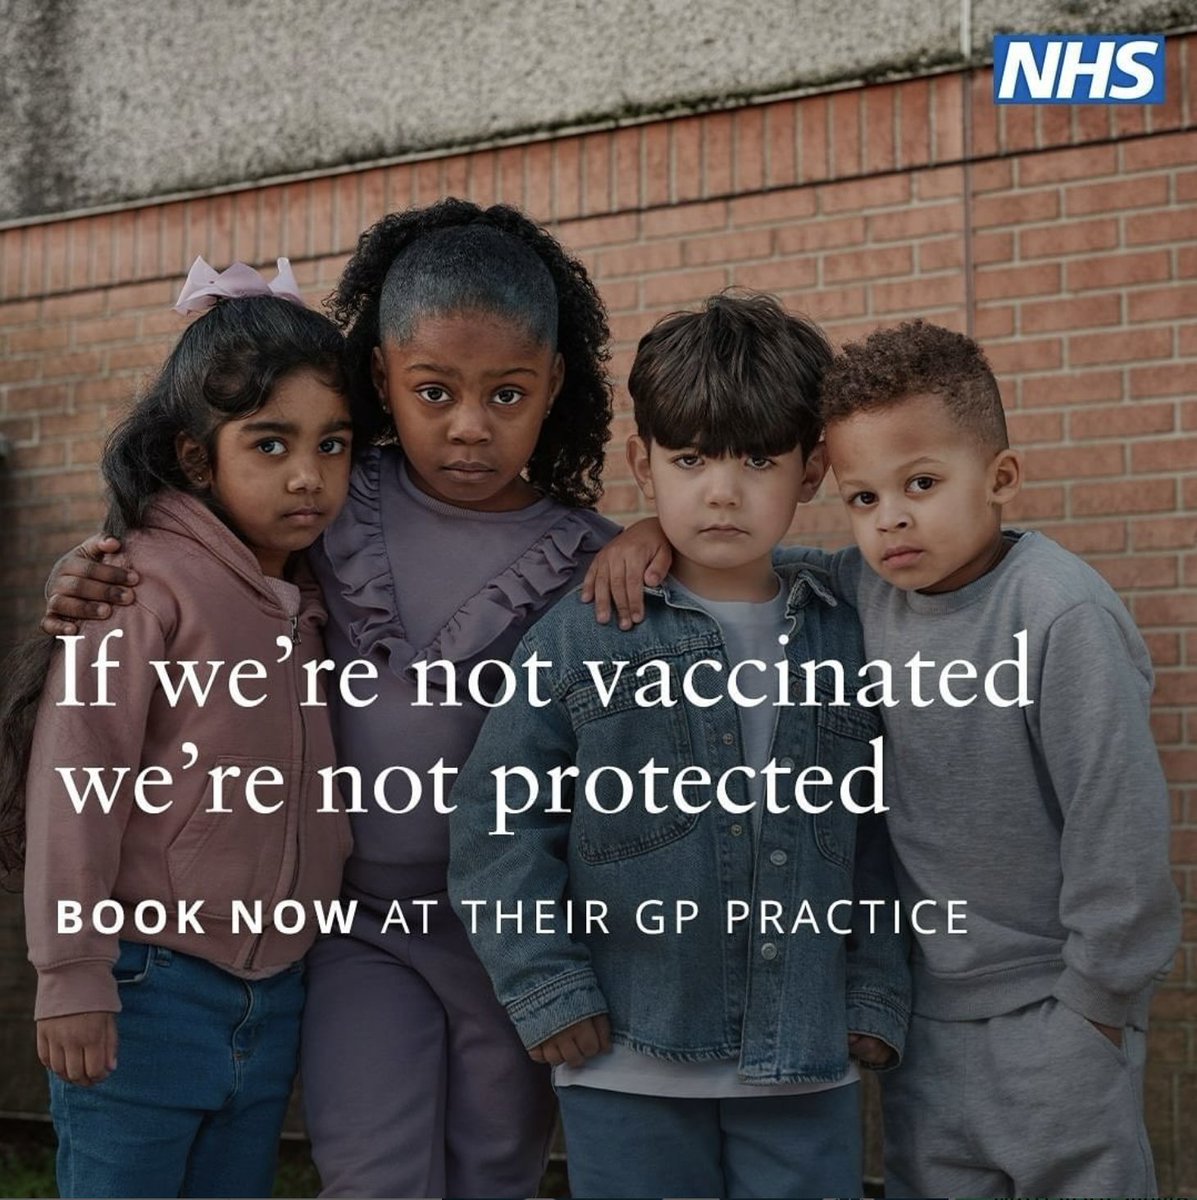 Is your child up to date with their vaccinations? Make sure you know by checking their Red Book or contacting your GP surgery to find out & book in any missed doses. 📱📅 More info: nhs.uk/childhoodvacci…